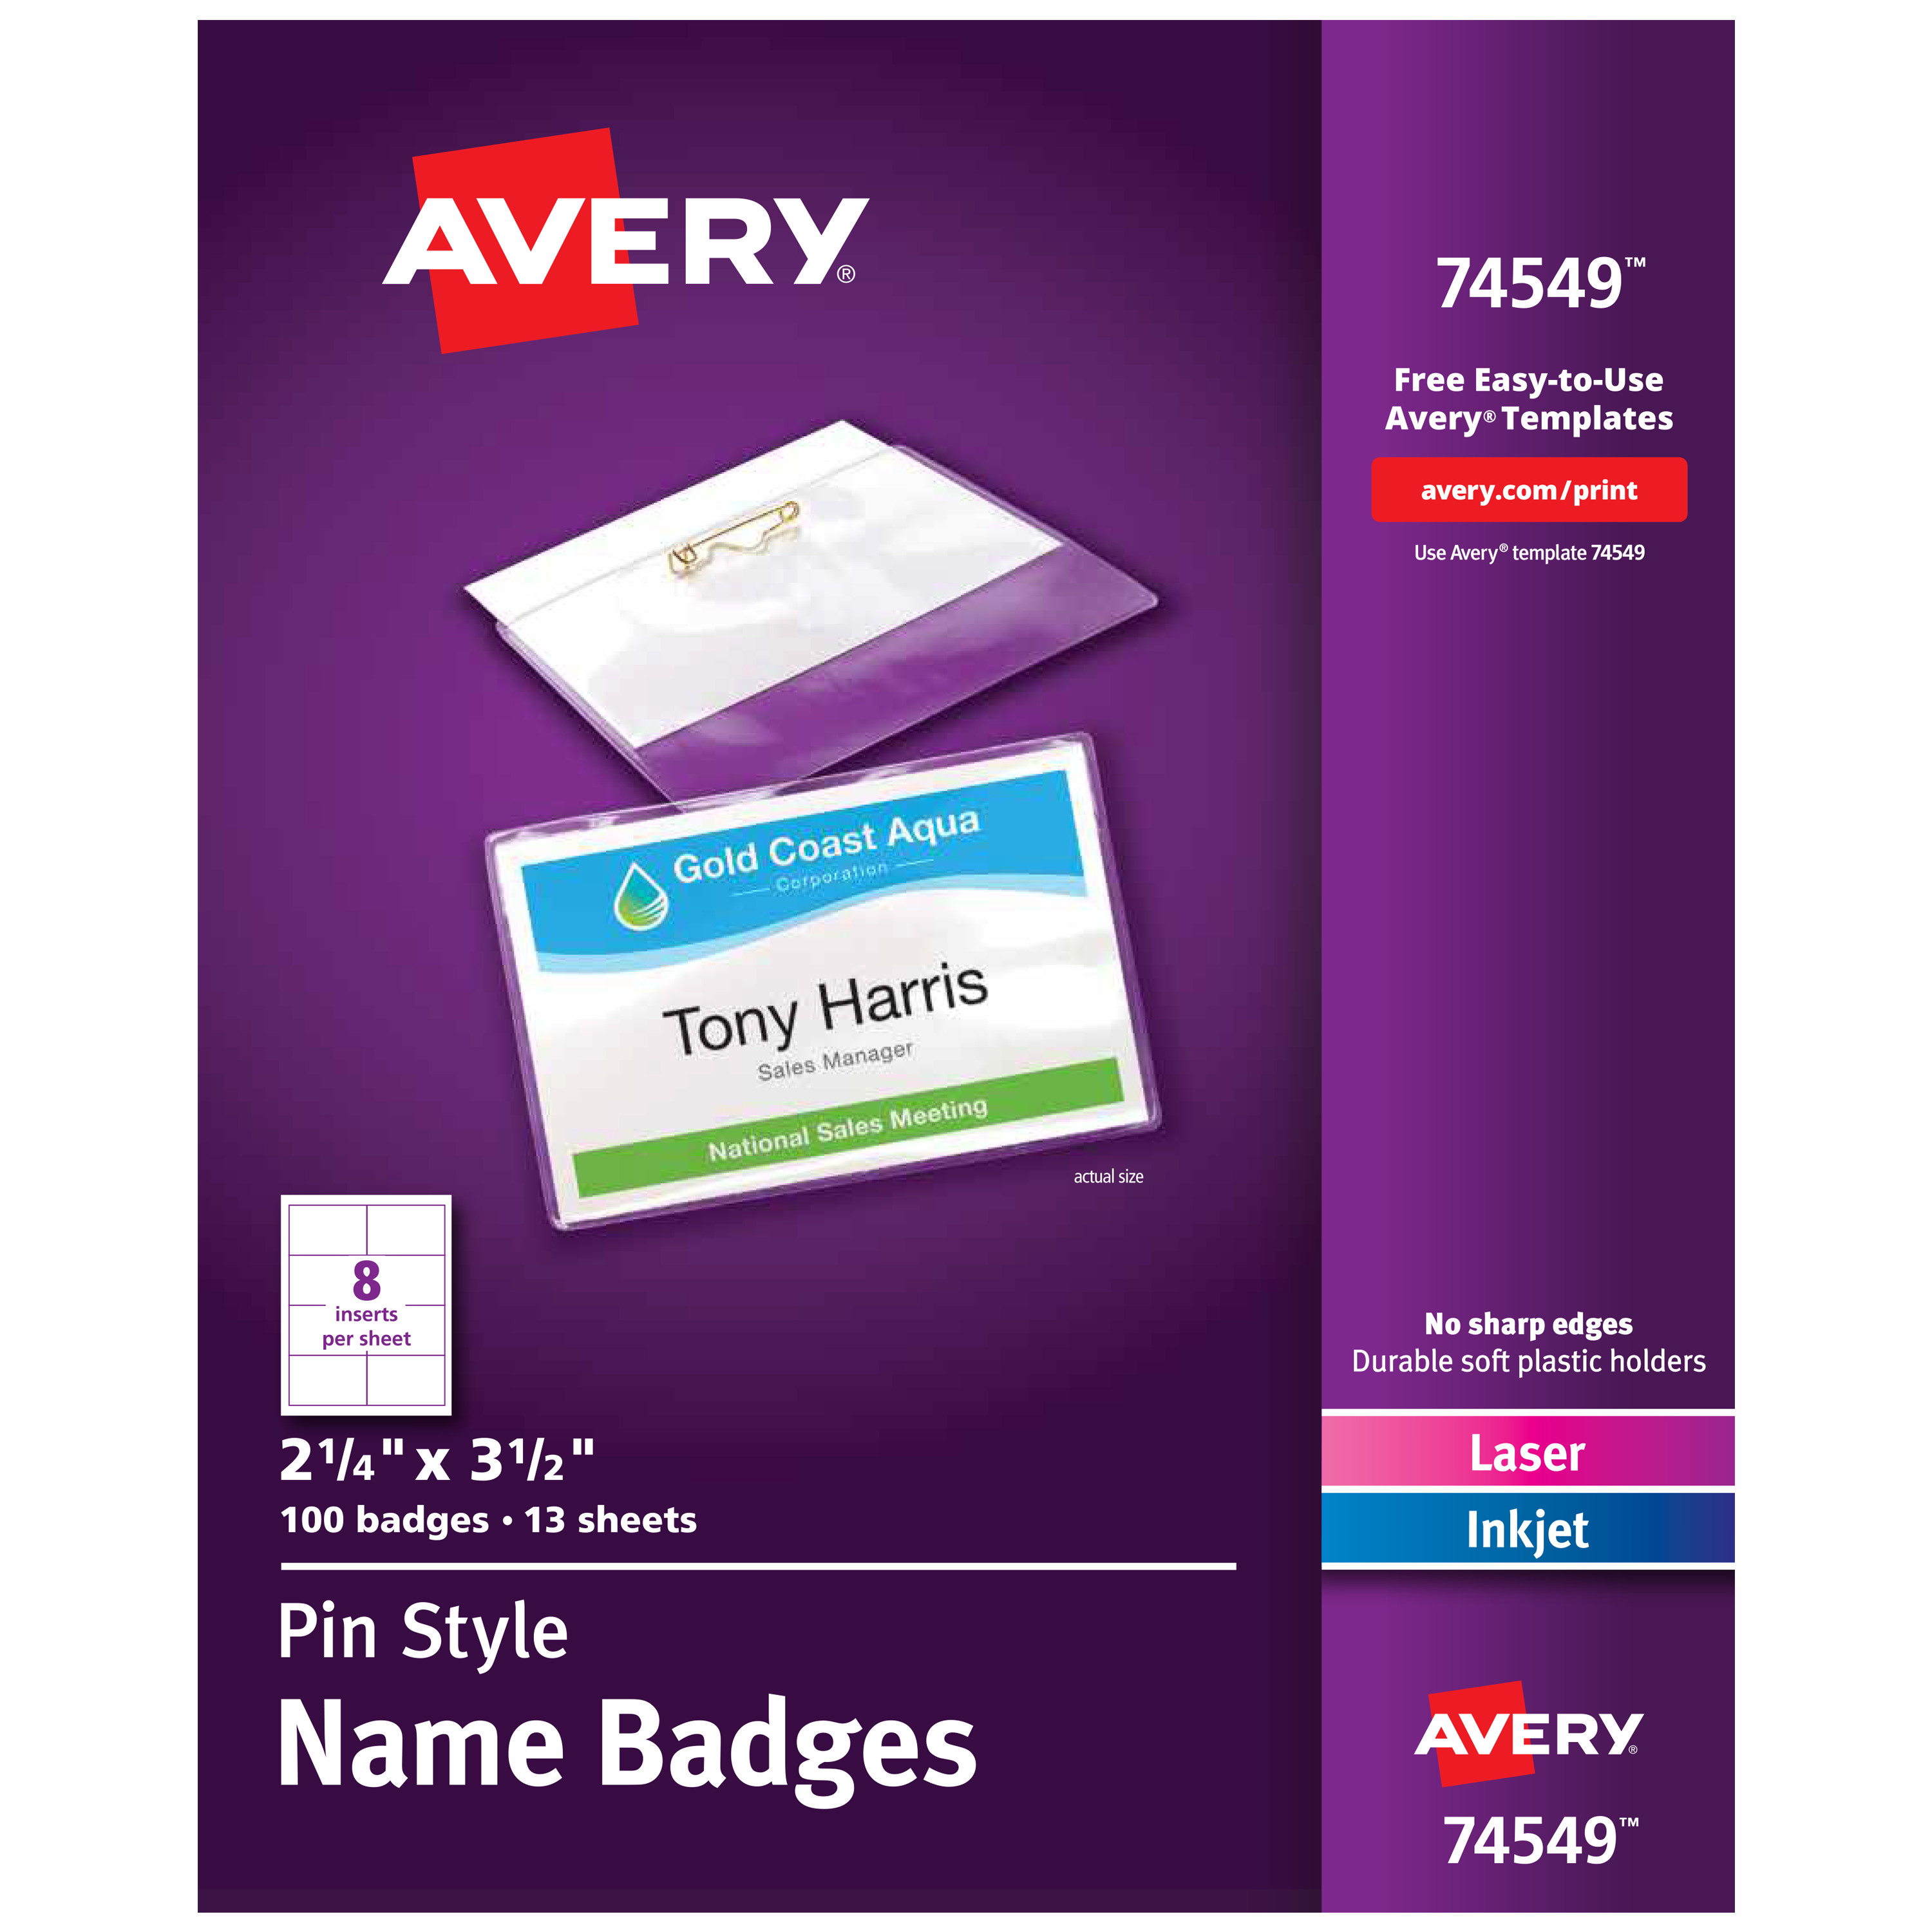 Avery Name Badges with Pins, 2.25" x 3.5", 100 Badges (74549) - image 1 of 9